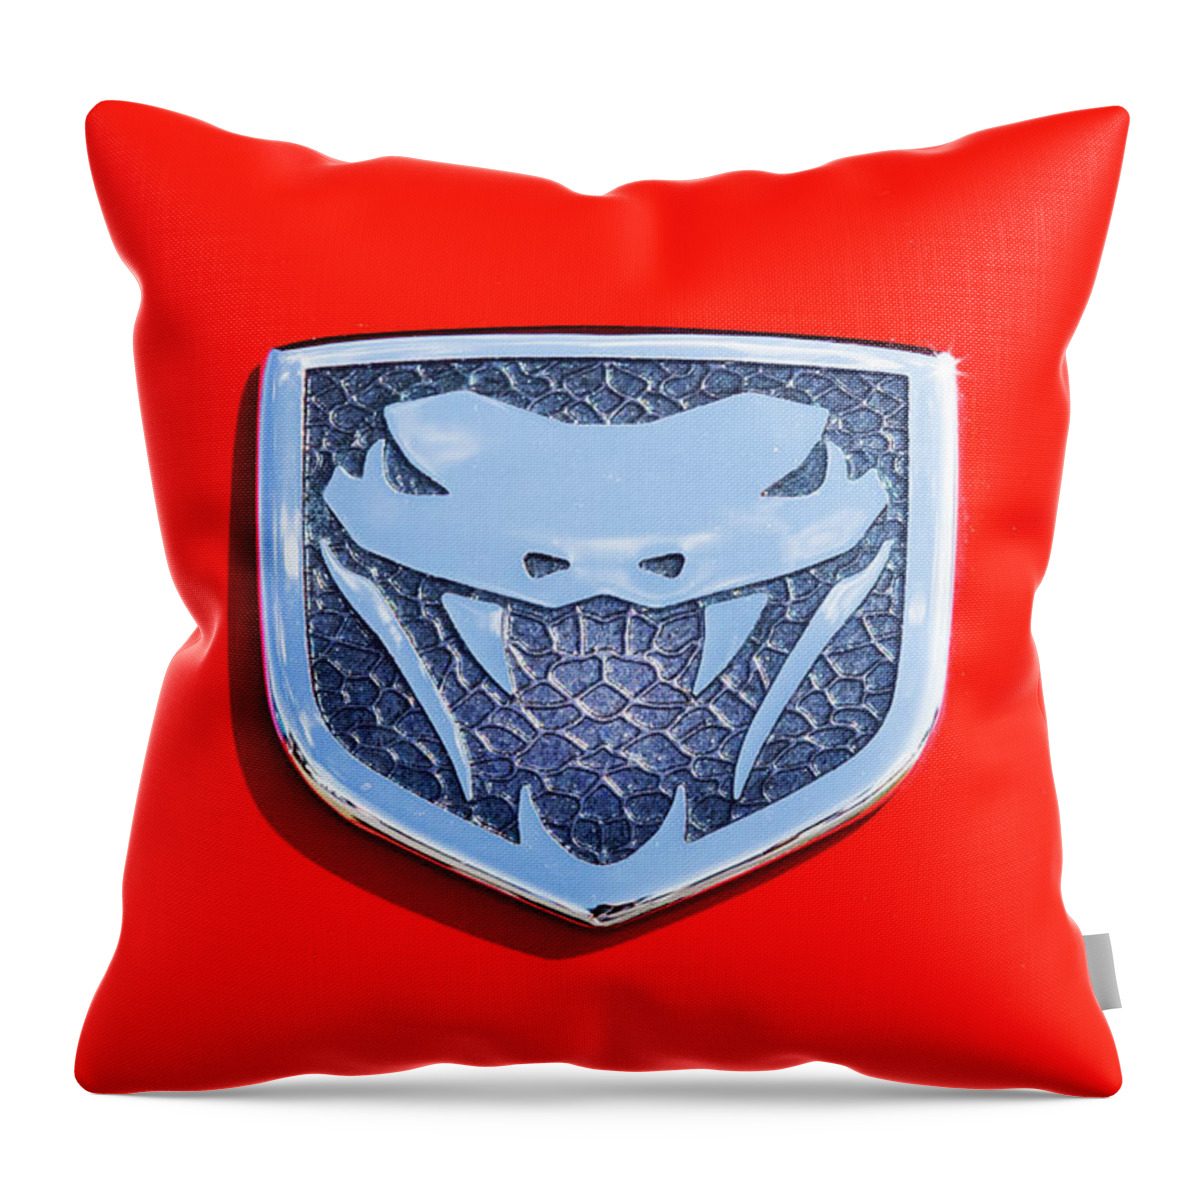 Viper Throw Pillow featuring the photograph Viper by David Stasiak